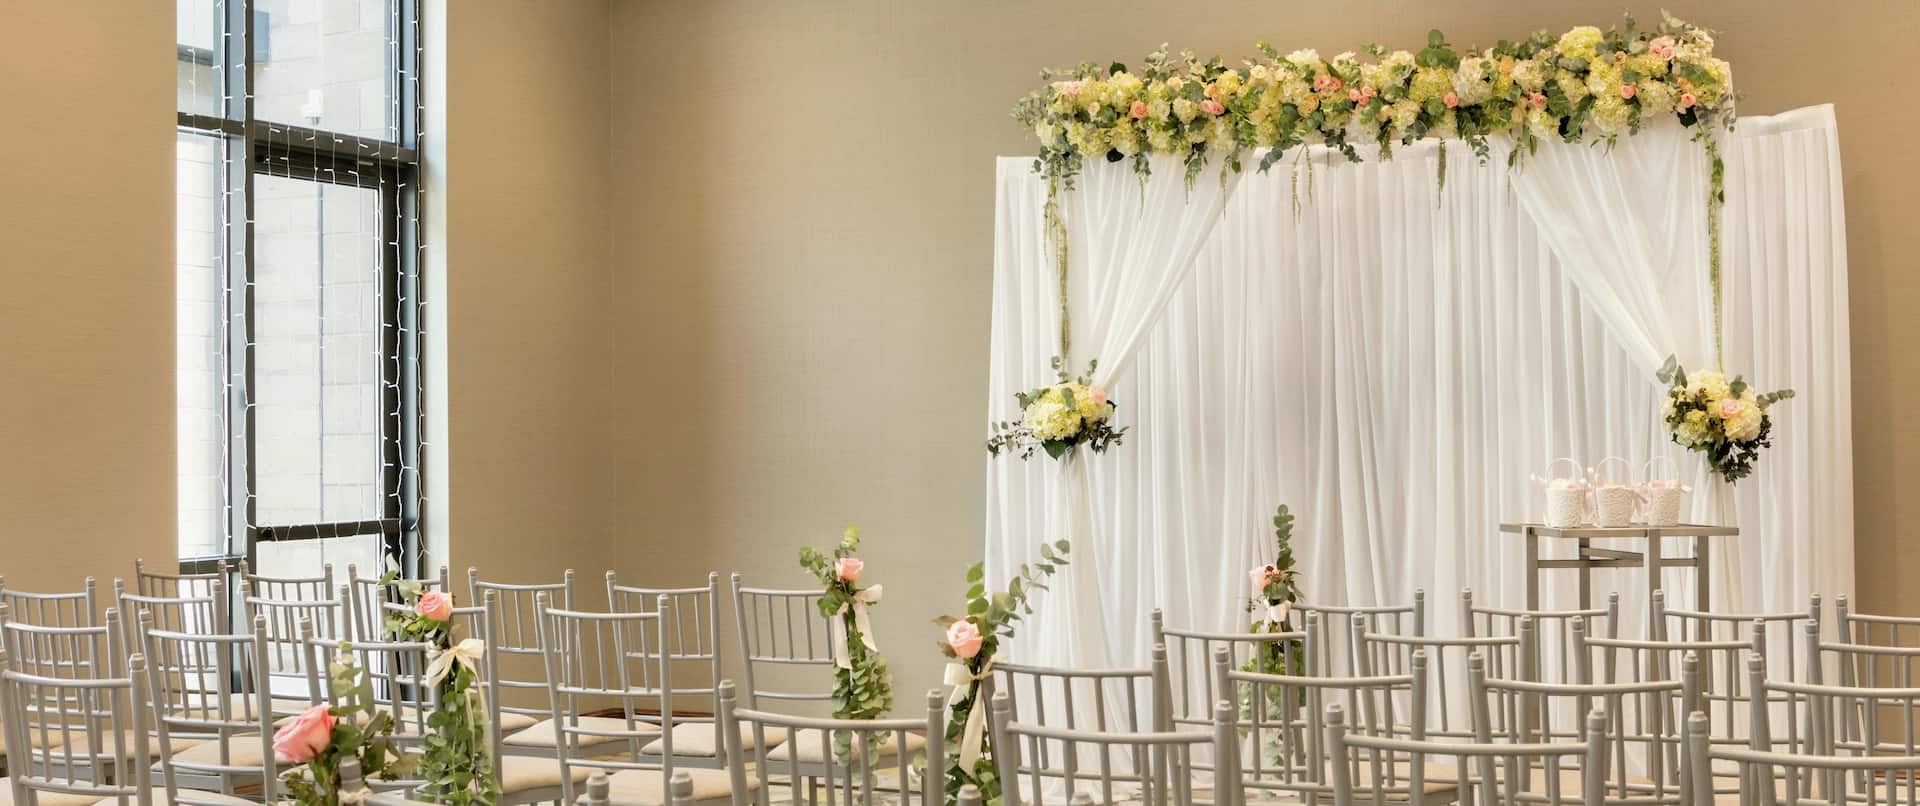 Meeting Room With A Wedding Set Up